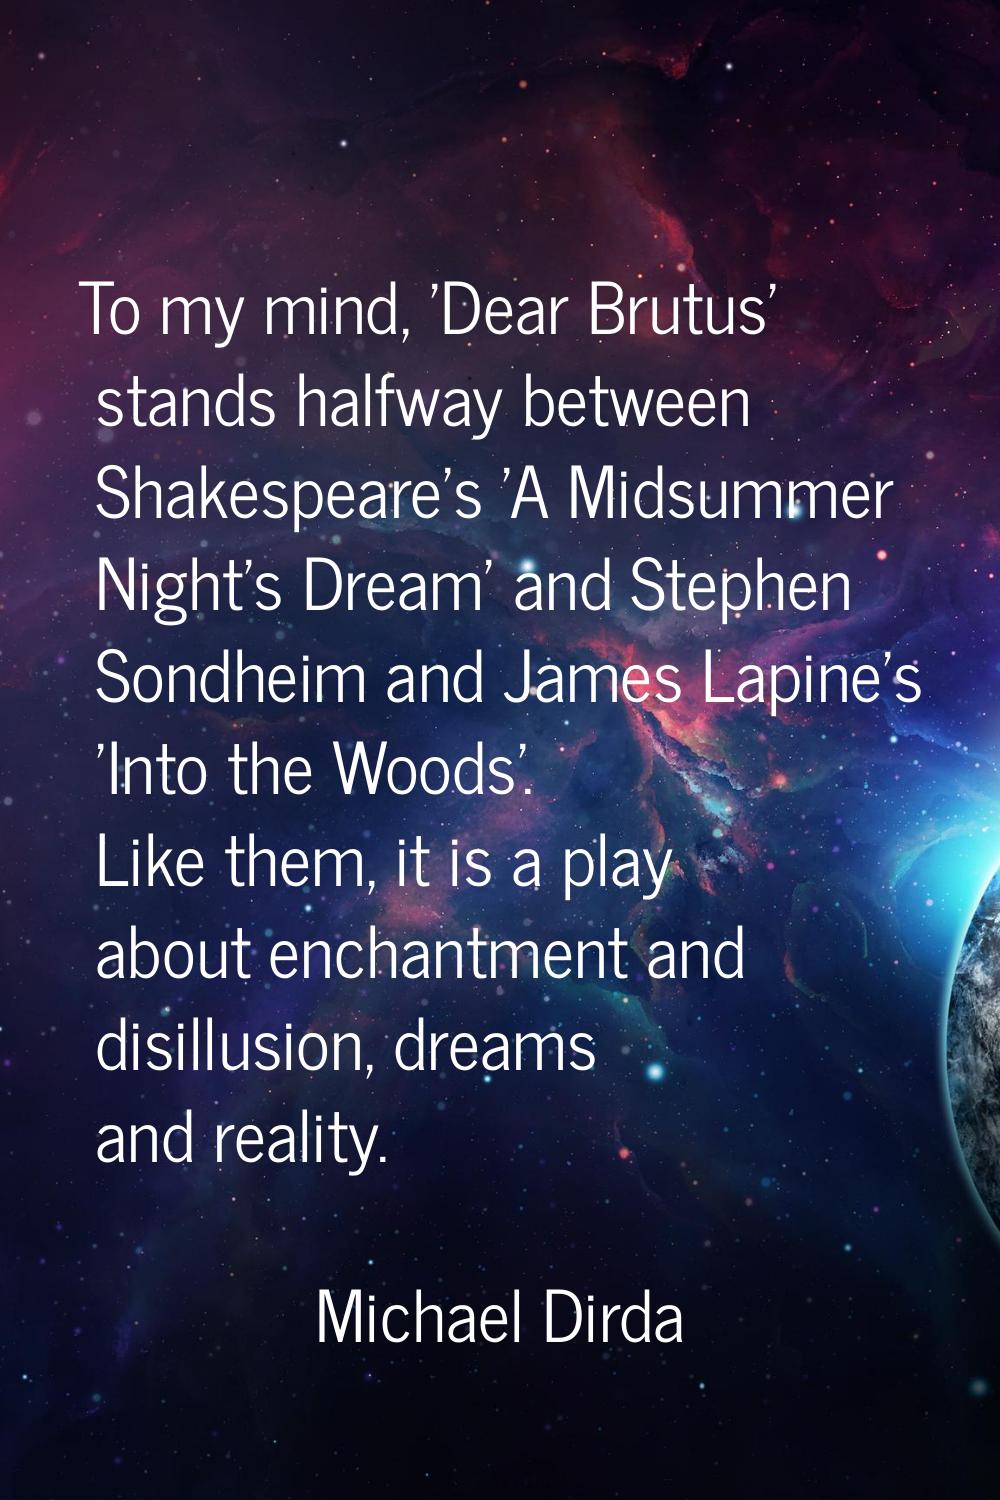 To my mind, 'Dear Brutus' stands halfway between Shakespeare's 'A Midsummer Night's Dream' and Step